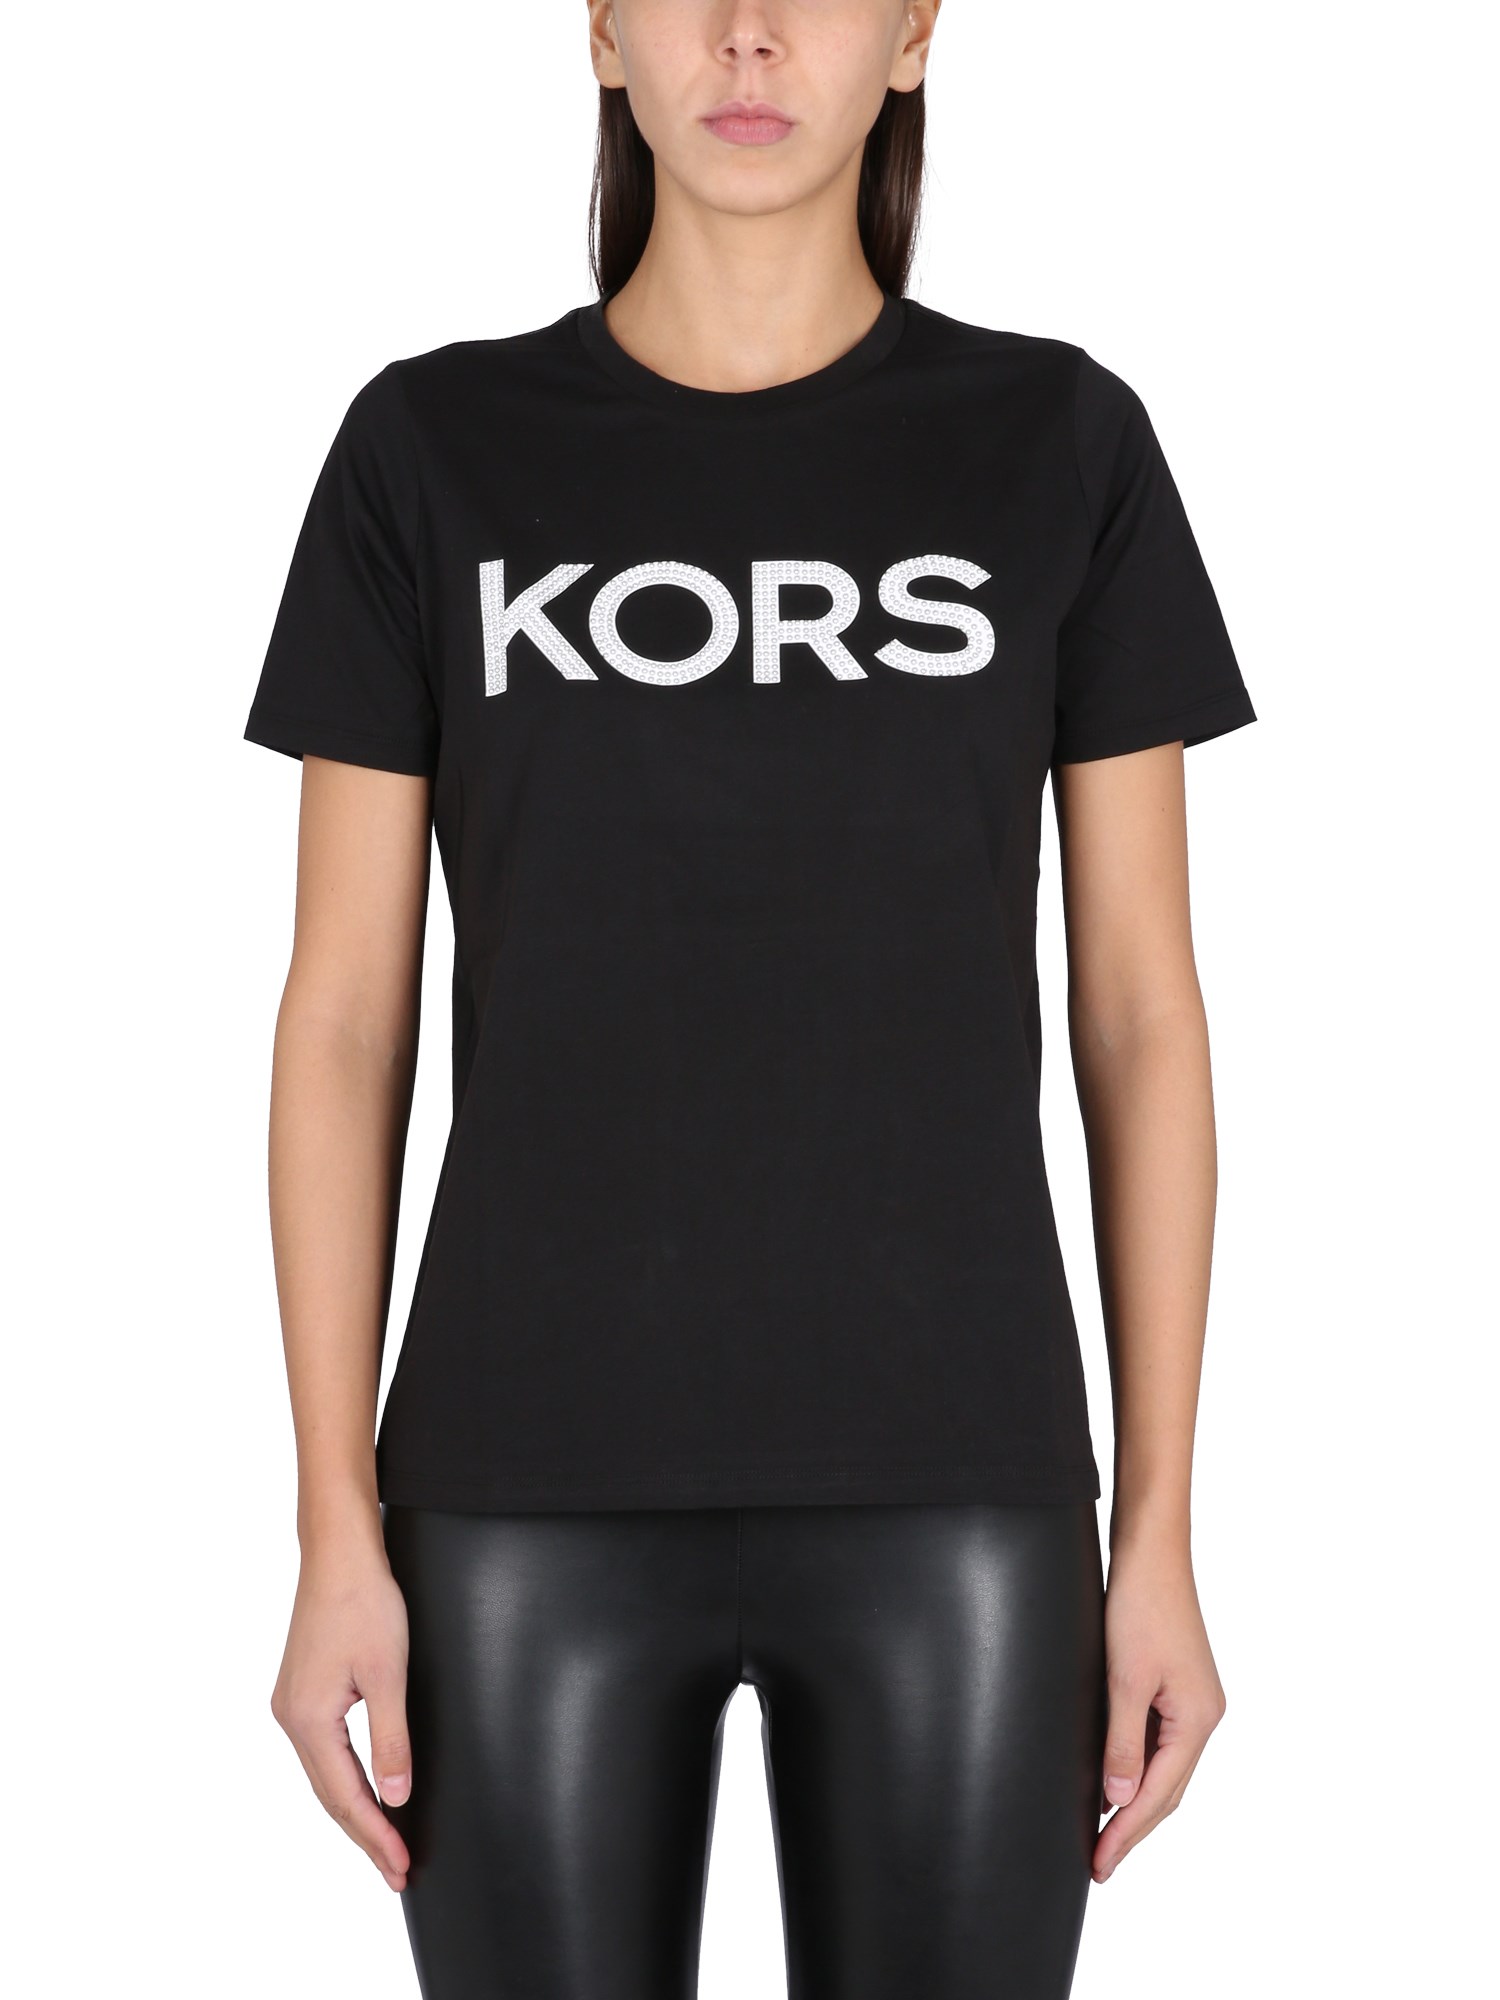 michael by michael kors t-shirt with logo